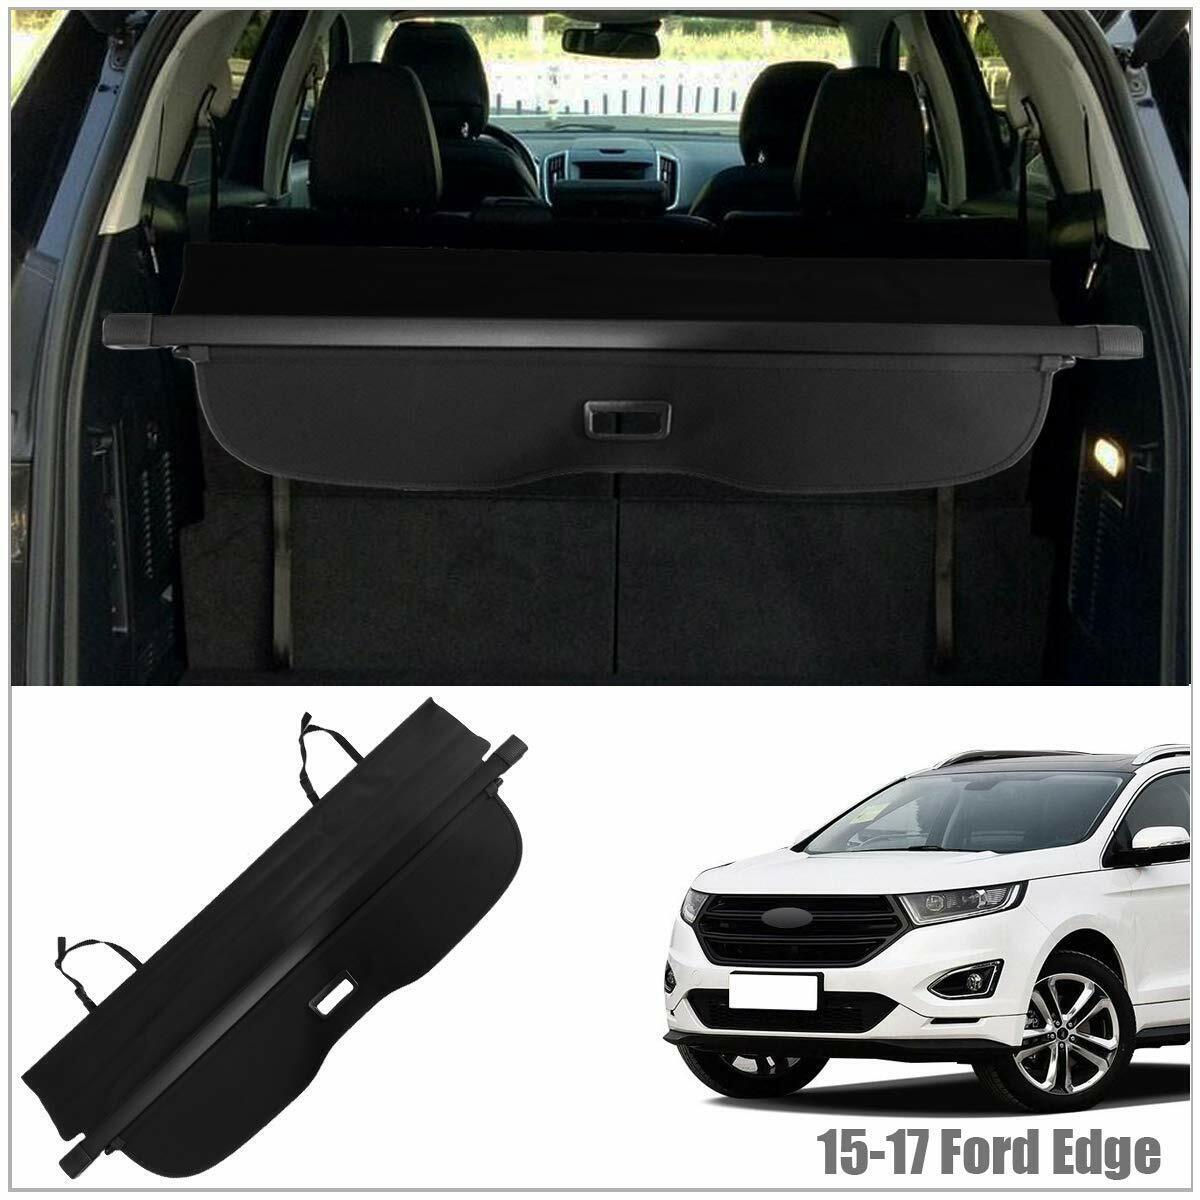 Rear Trunk Cover Retractable Black Cargo Cover Fits 2015-2017 Ford Edge